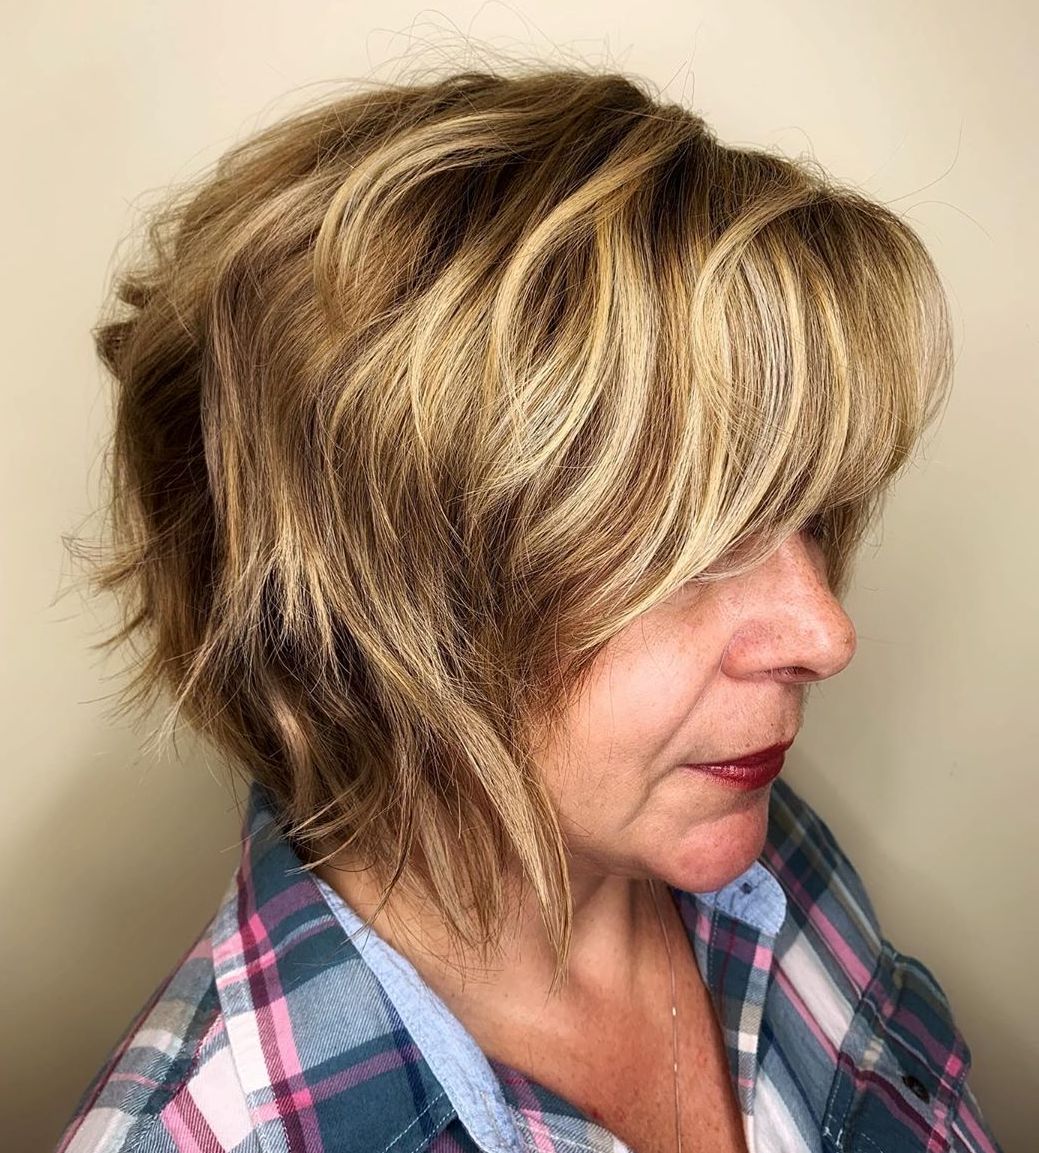 7 Iconic Wig Styles For Ladies Over 50